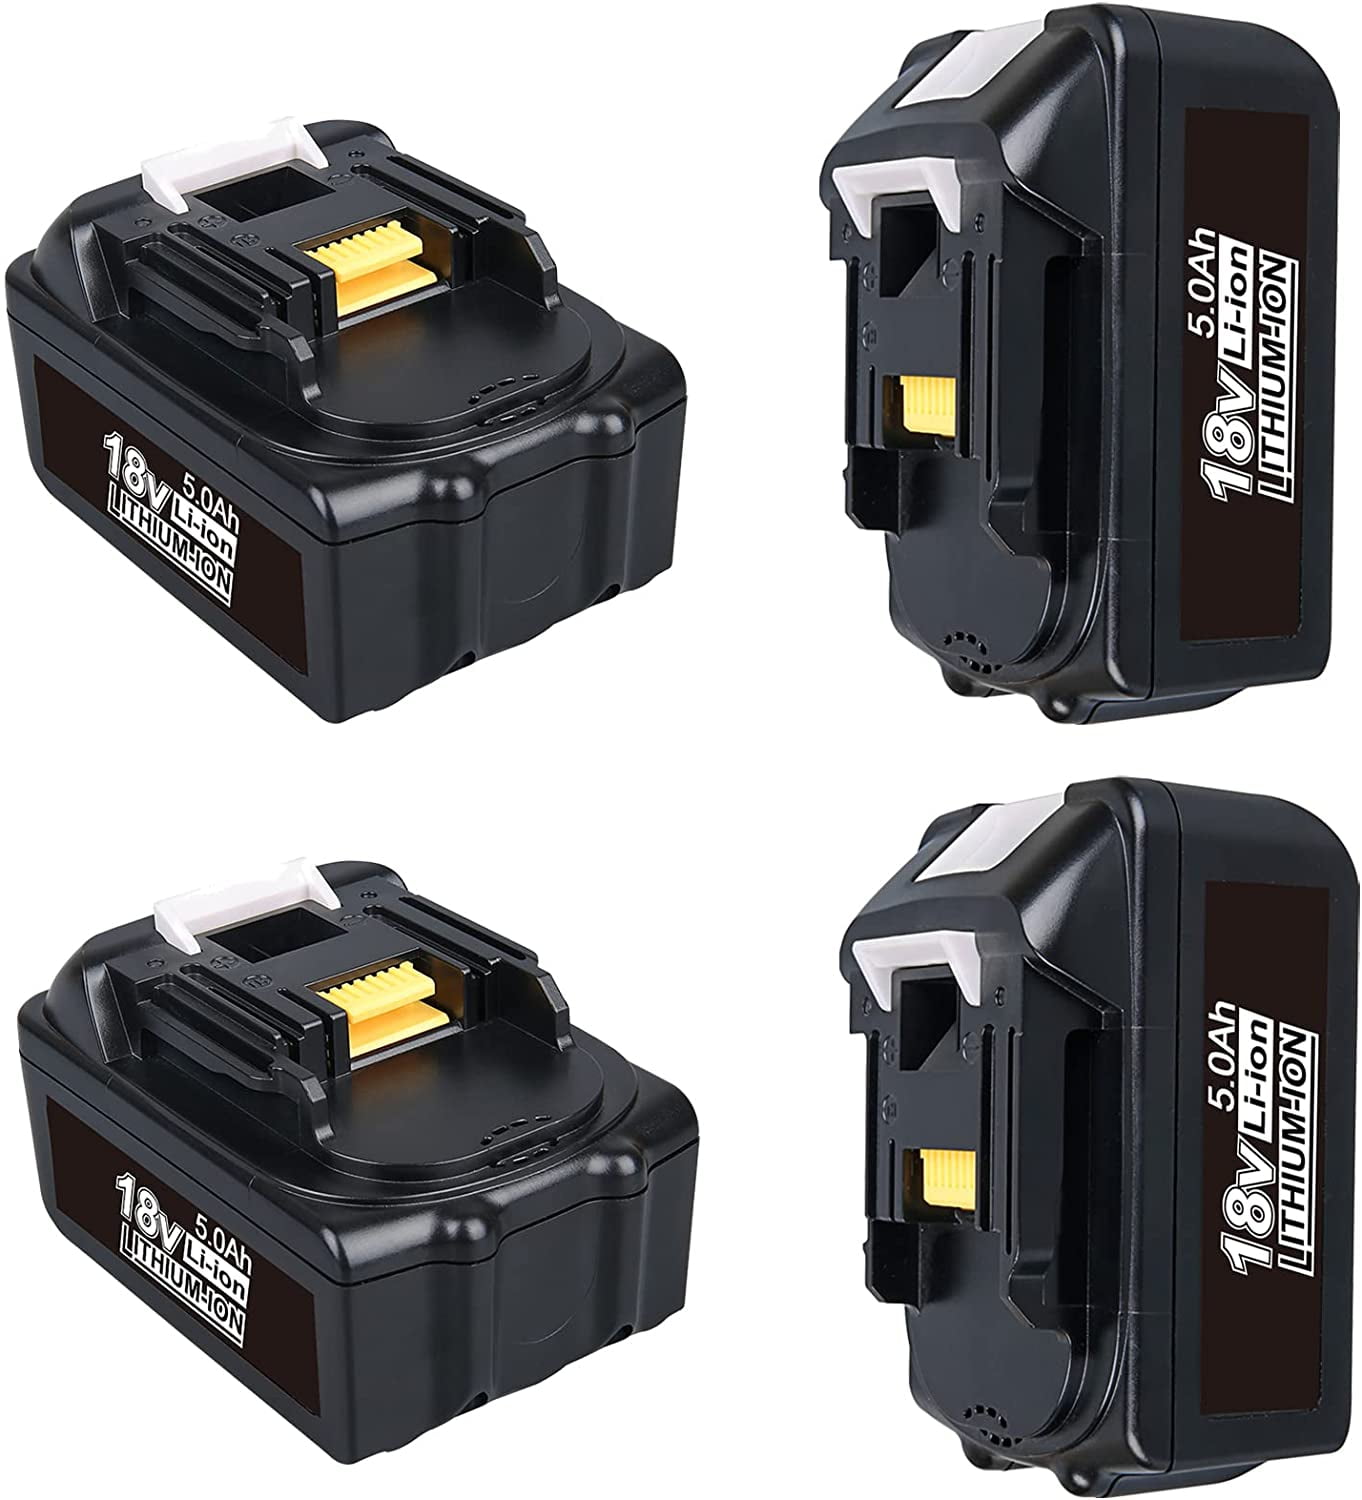 2 x 5.0Ah 18V Lithium Ion Battery For Makita BL1860 BL1850 BL1840 BL1830 LXT NEW 